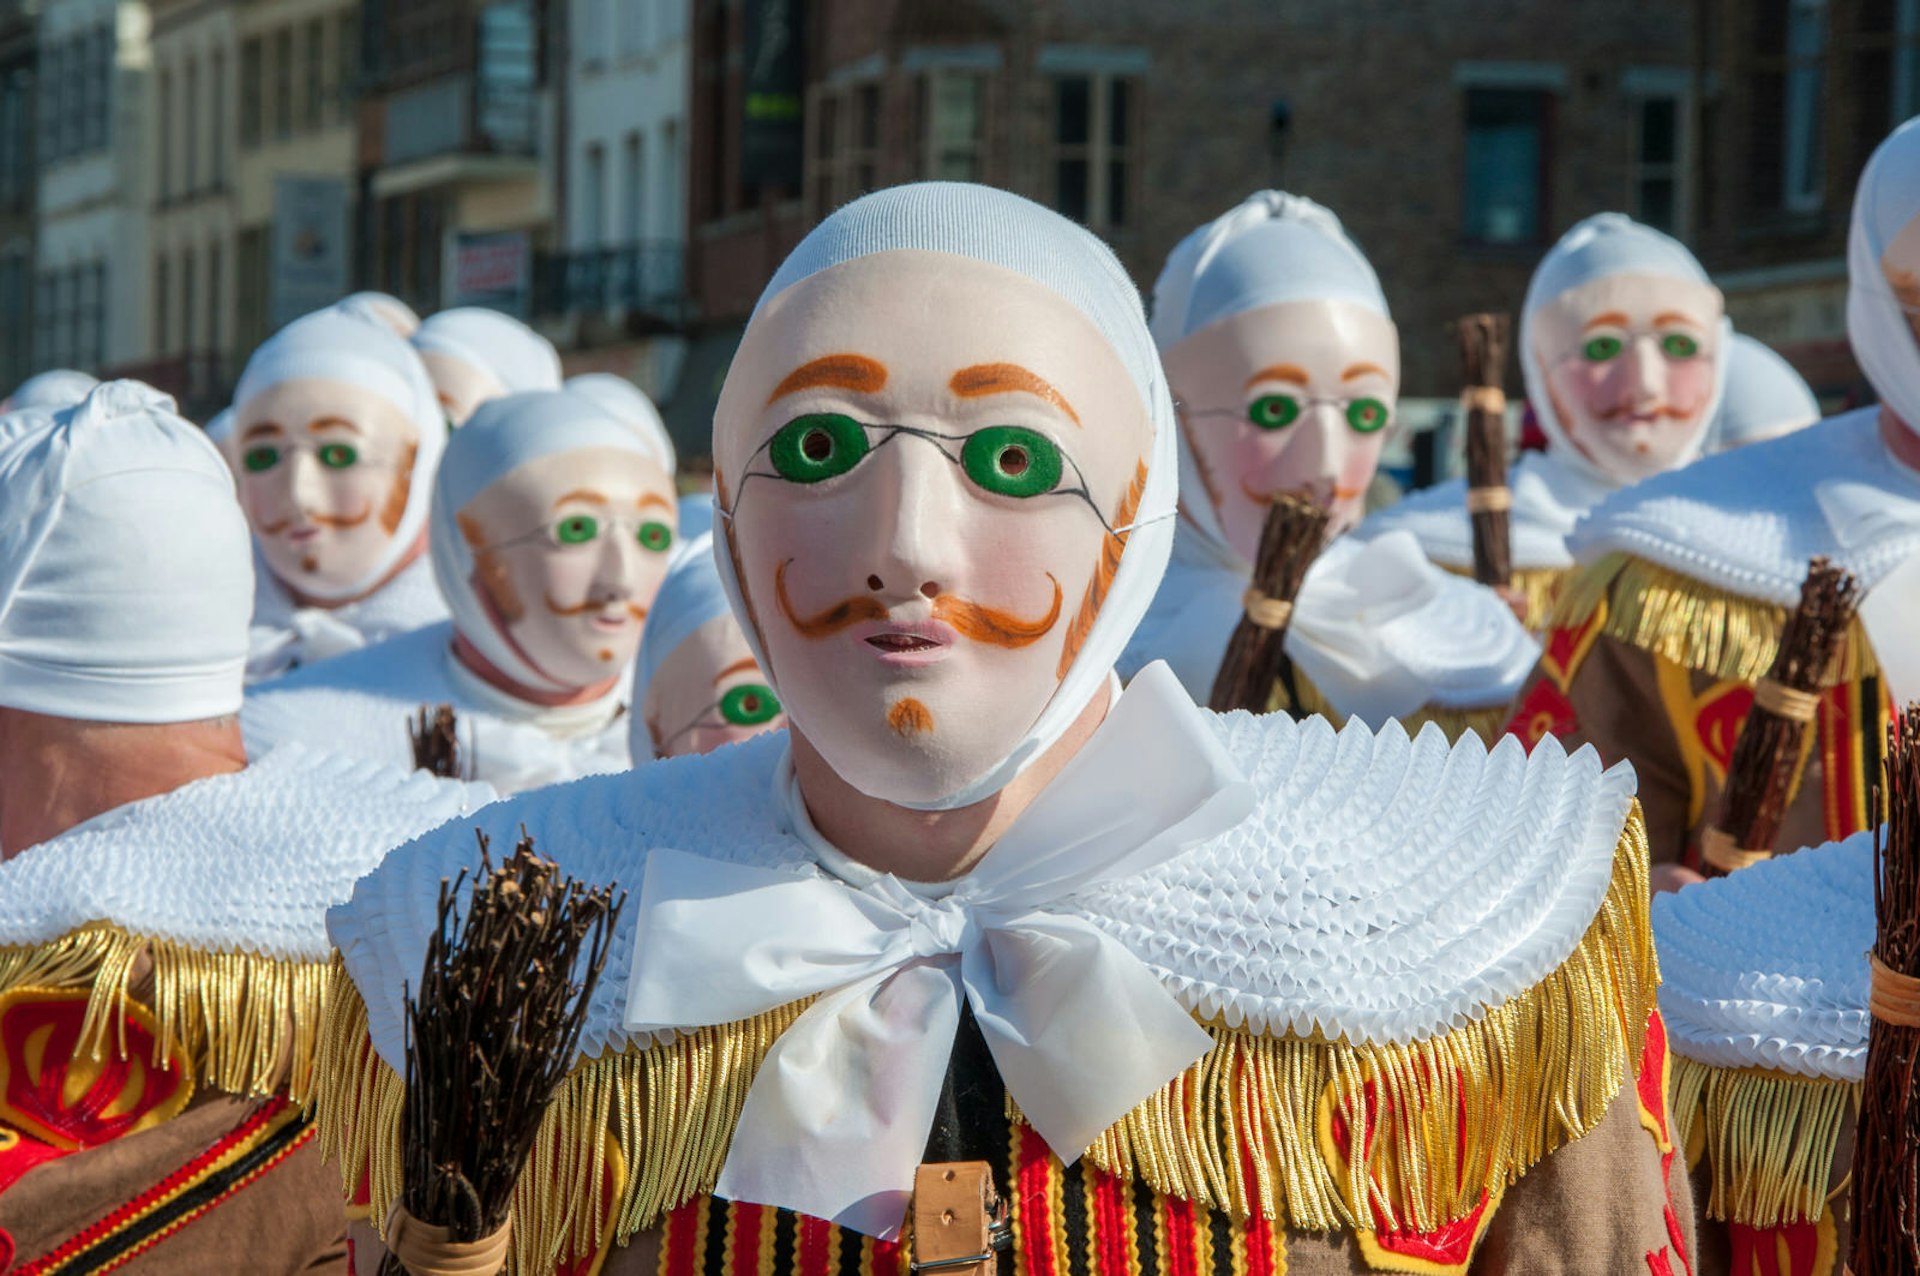 Revellers in the traditional Gilles costume at the Carnaval de Binche